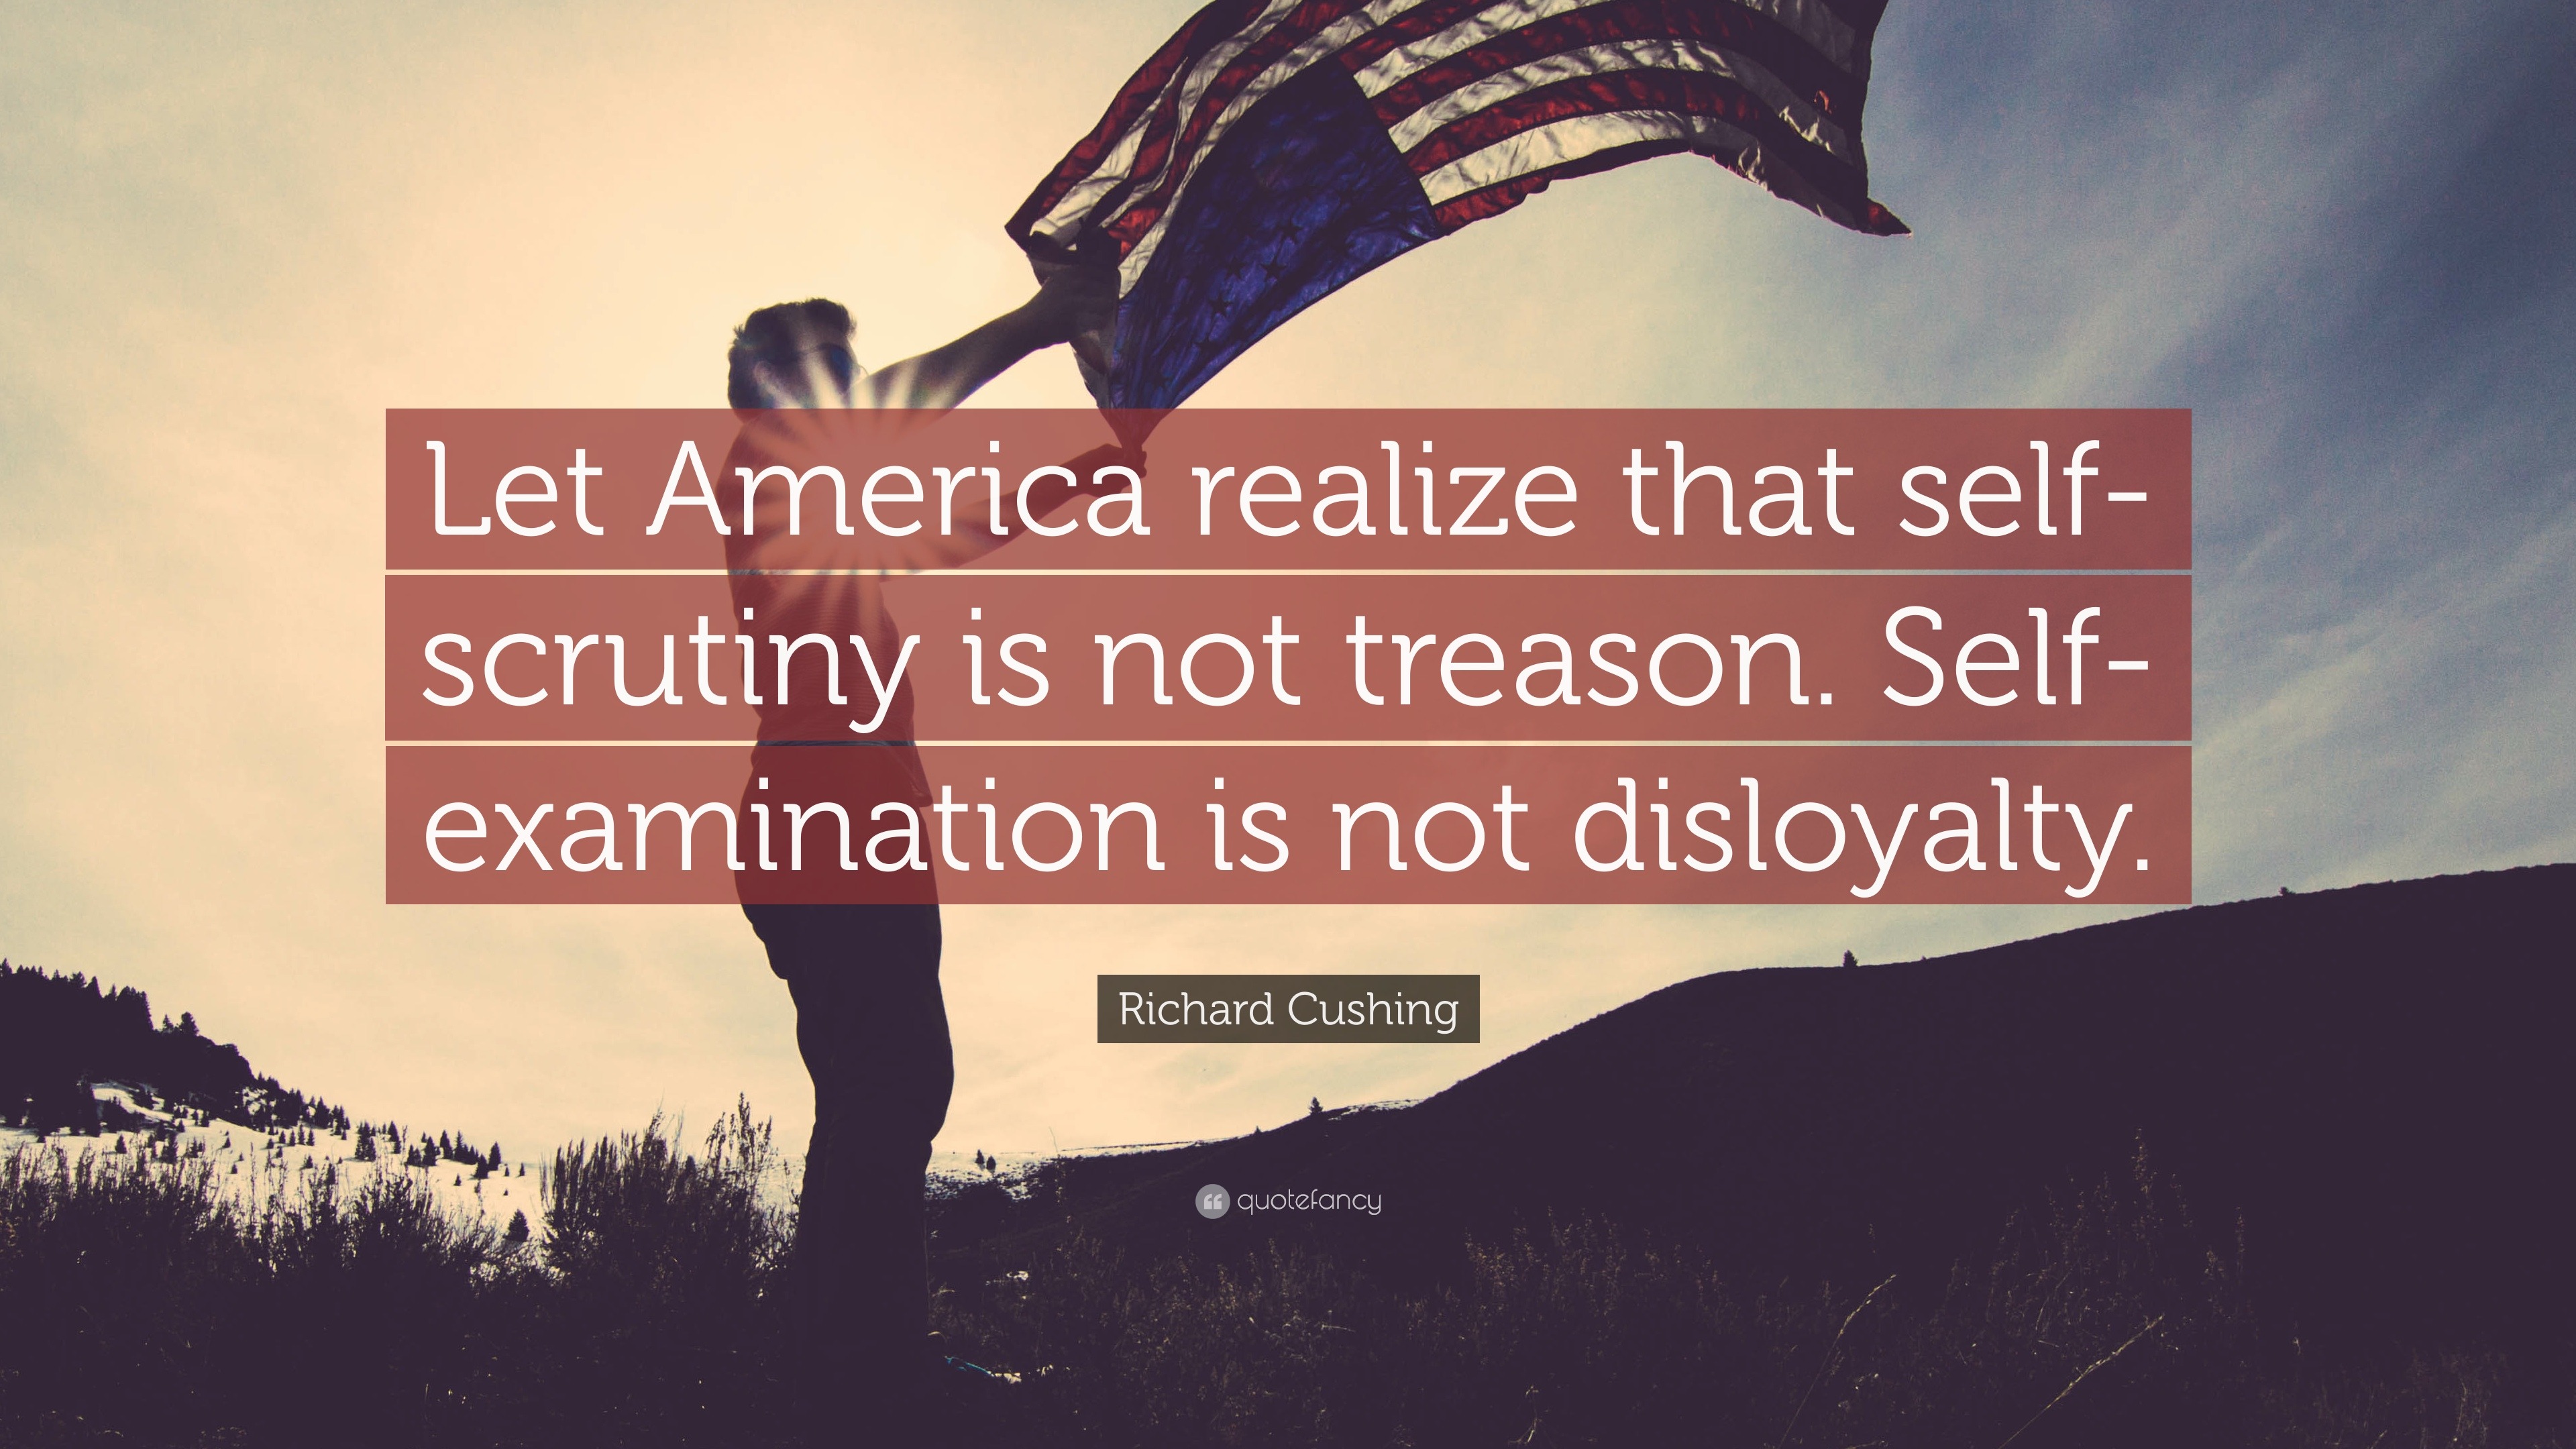 Richard Cushing Quote “Let America realize that self scrutiny is not treason